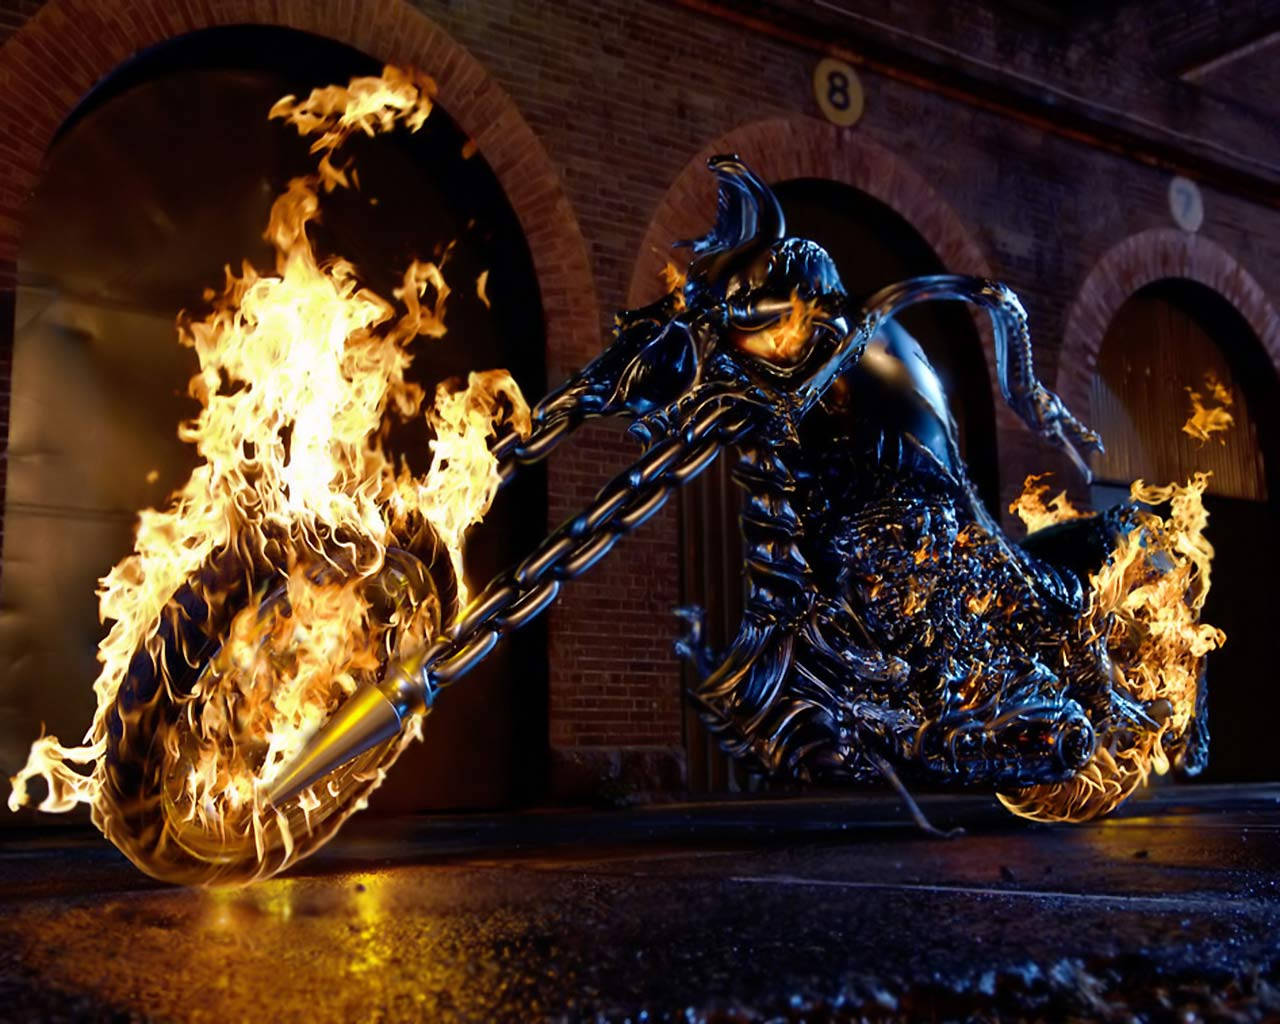 Cool 3d Ghost Rider's Motor Background